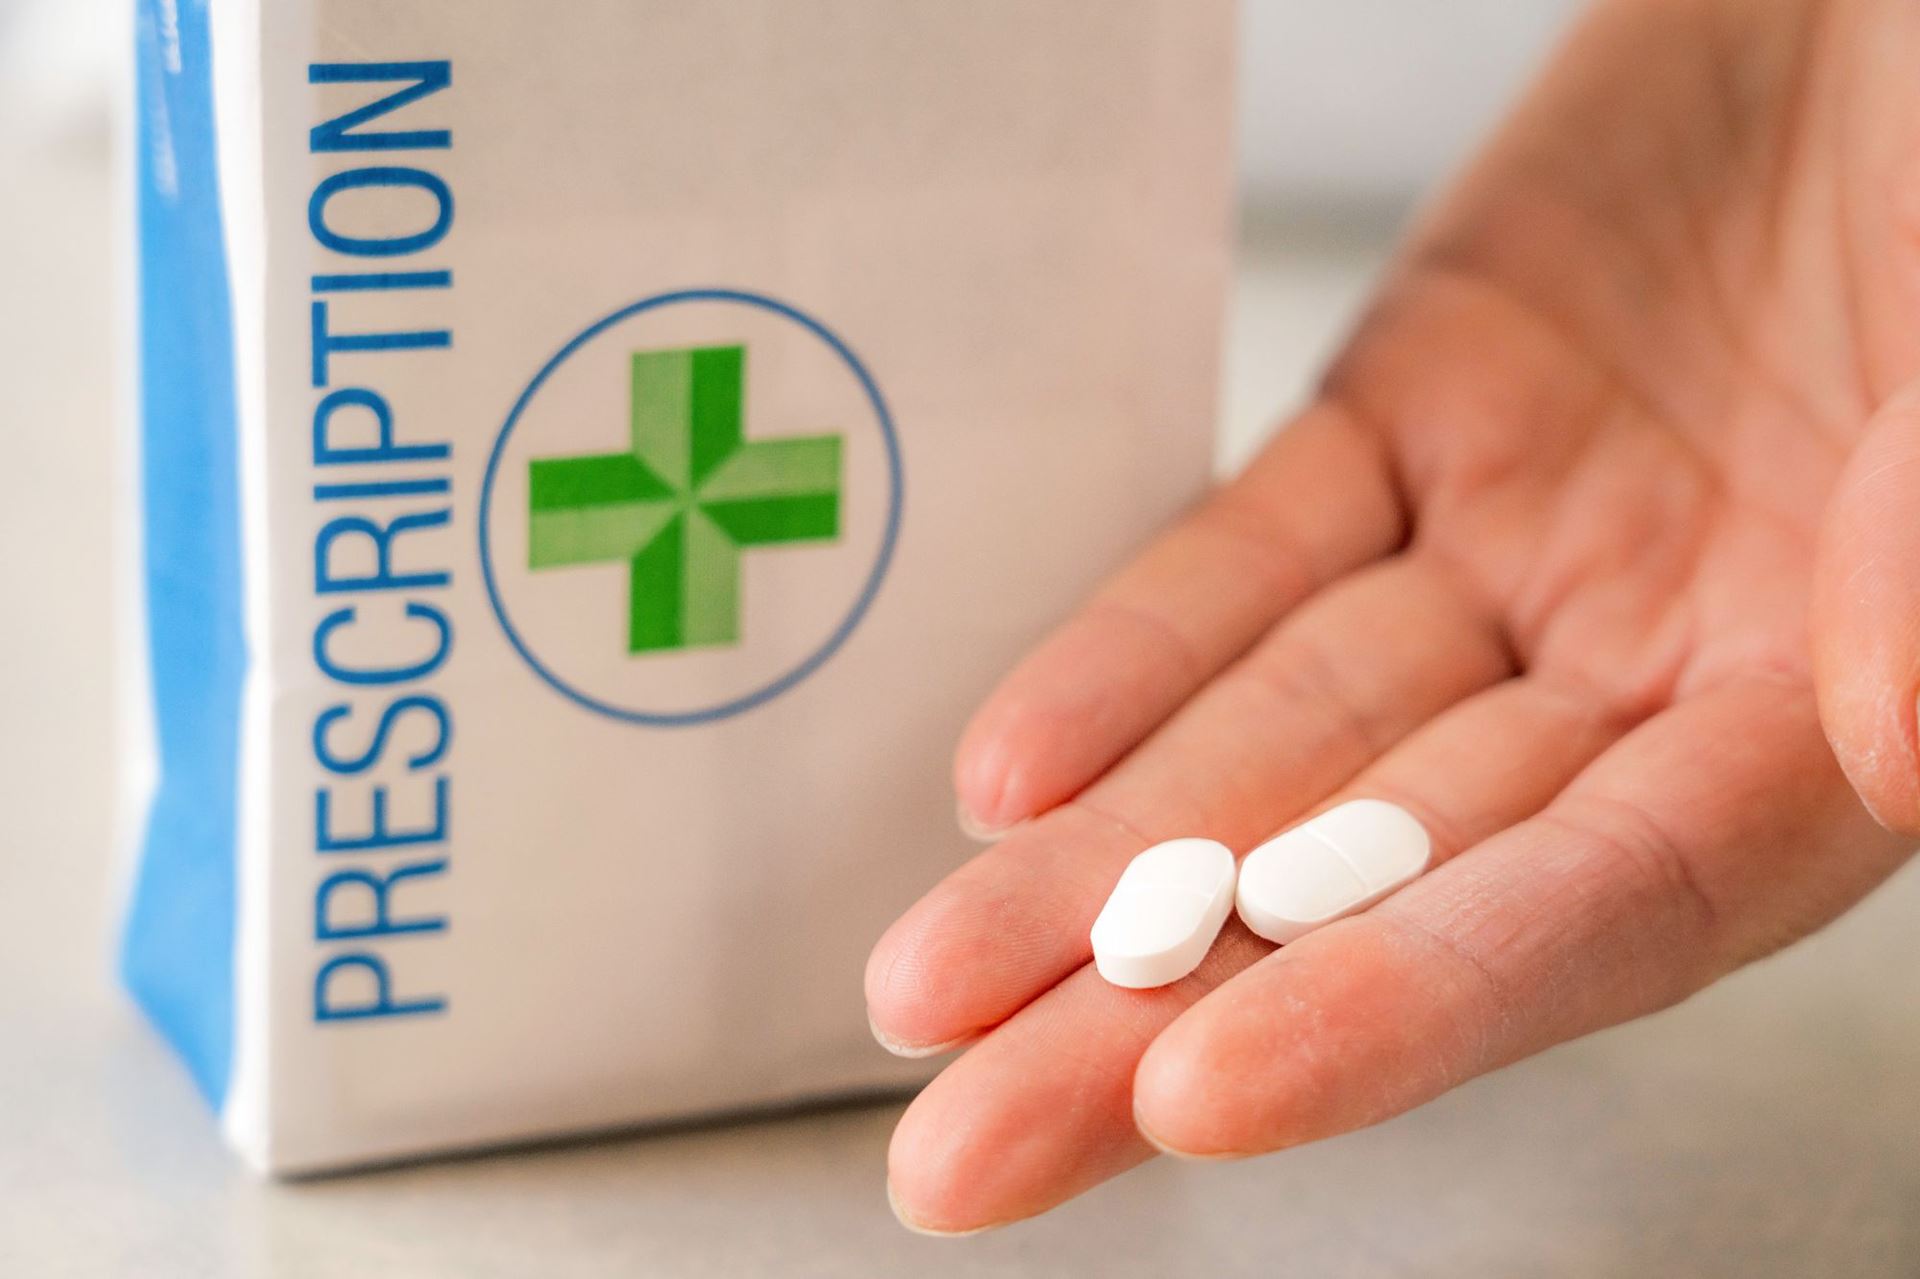 Image of Prescription Paper Bag hand holding two tablets